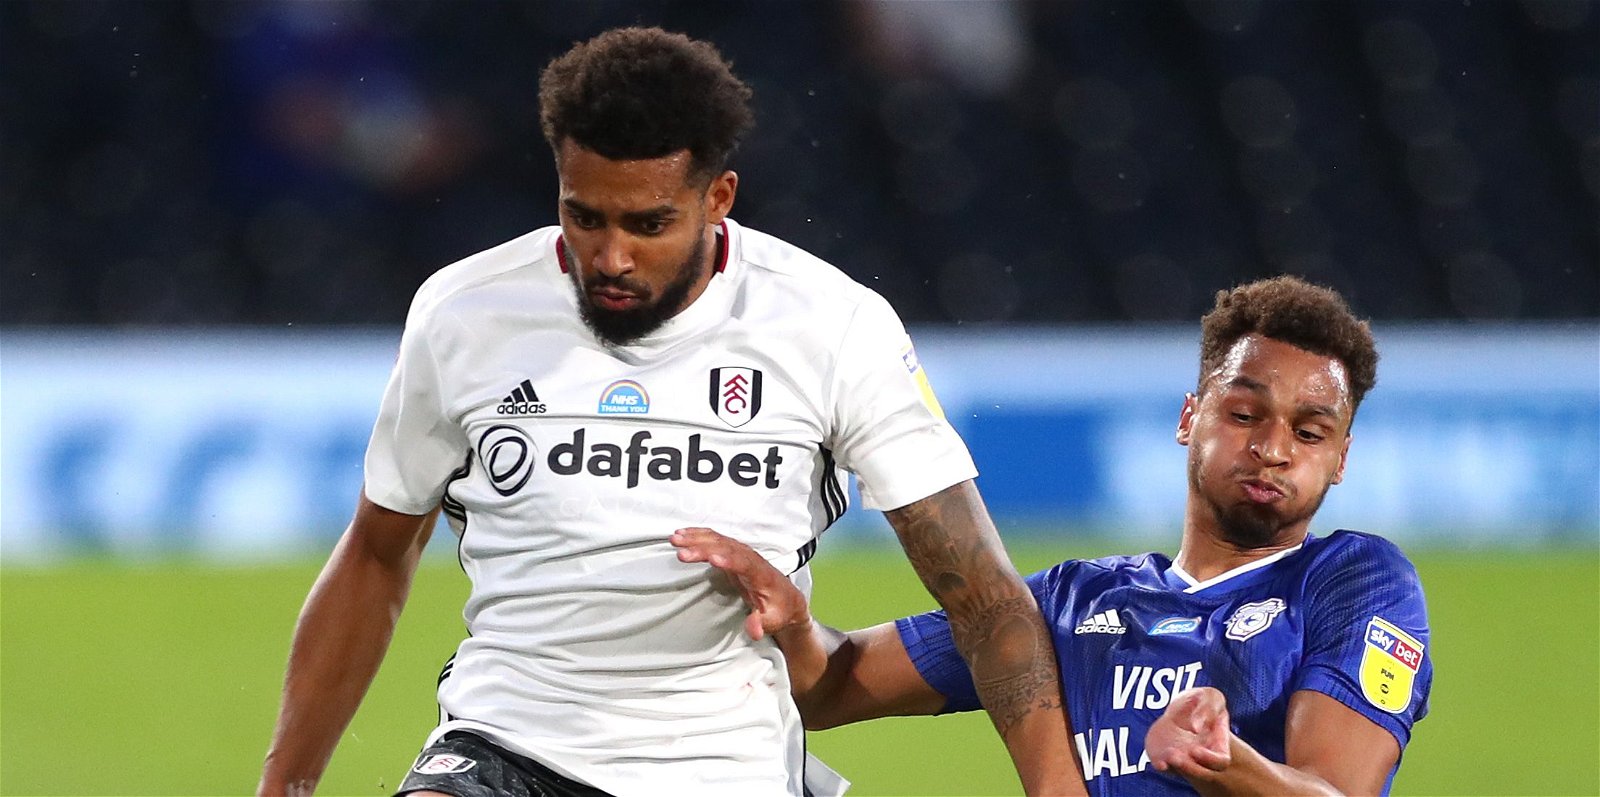 Fulham, Fulham ready to let Cyrus Christie leave for nothing &#8211; Stoke City, Burnley keen